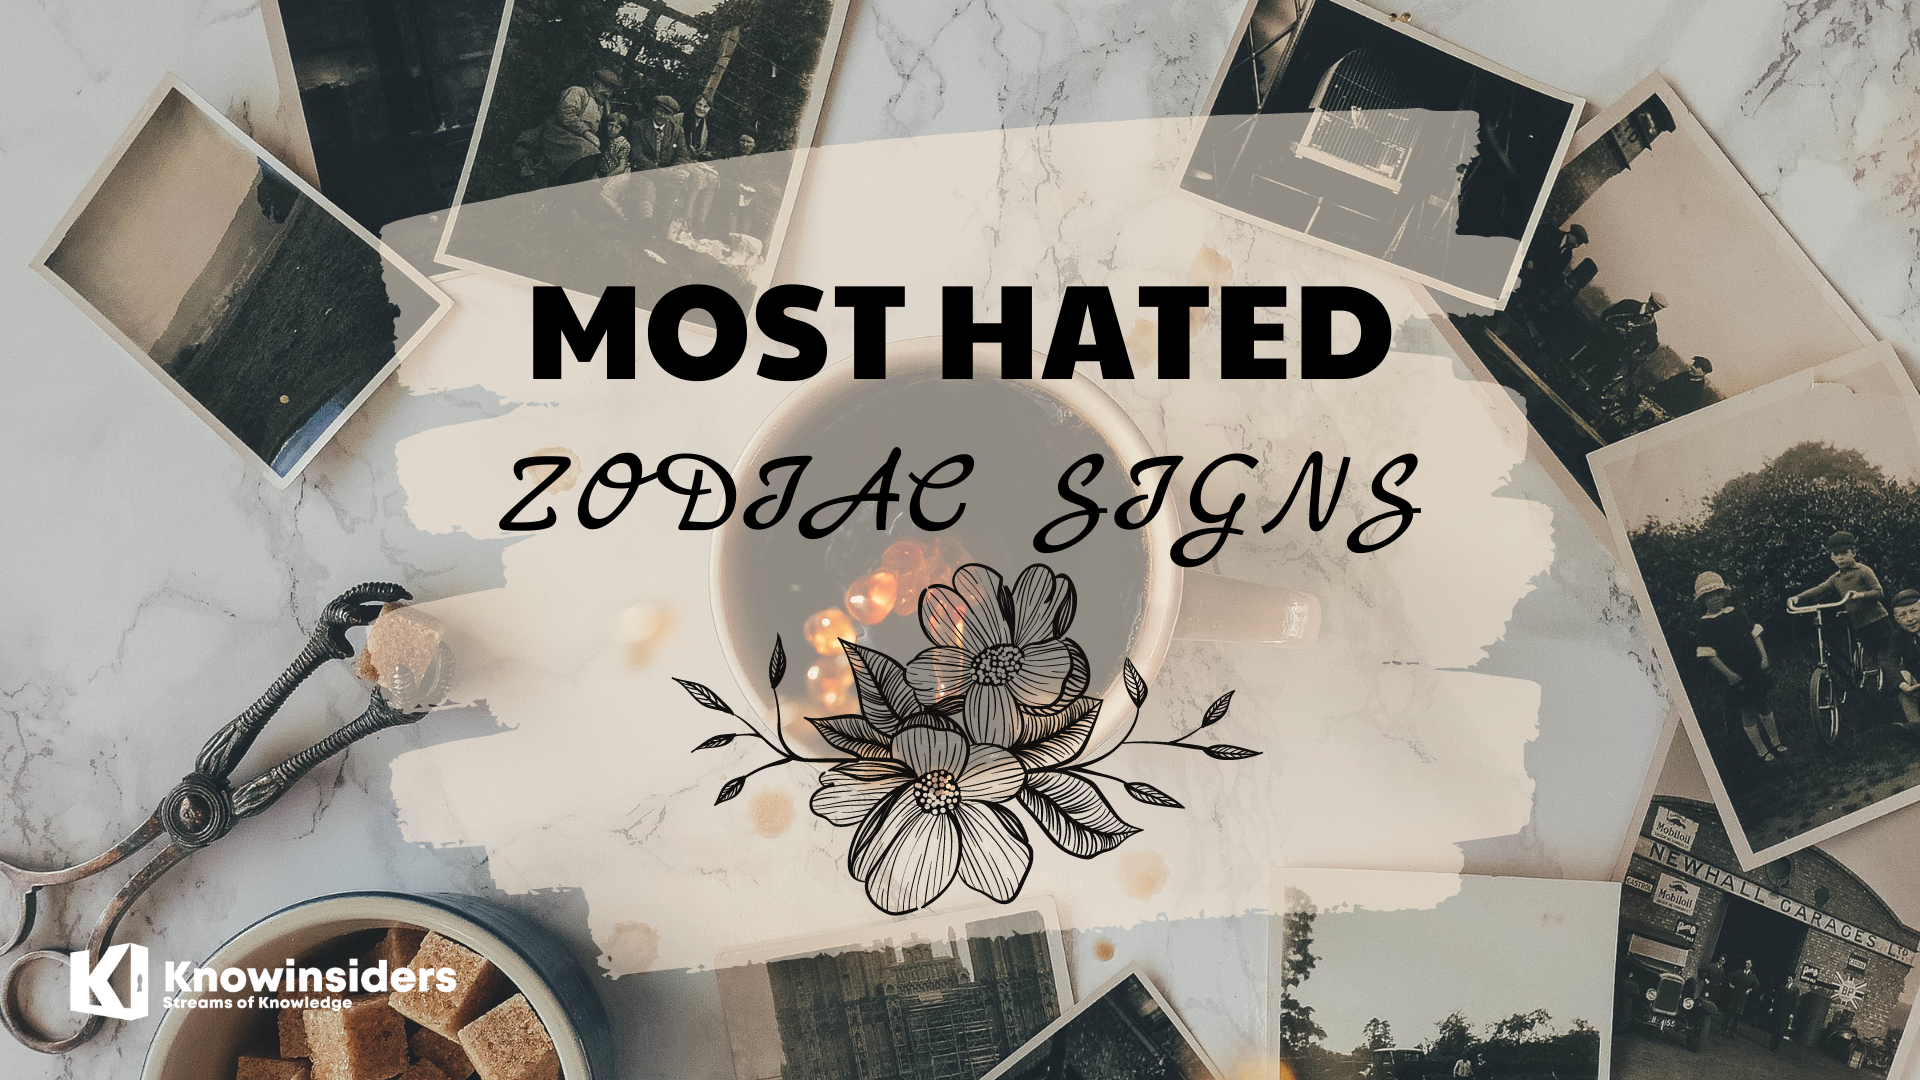 Most Hated Zodiac Signs. Photo: Knowinsiders.